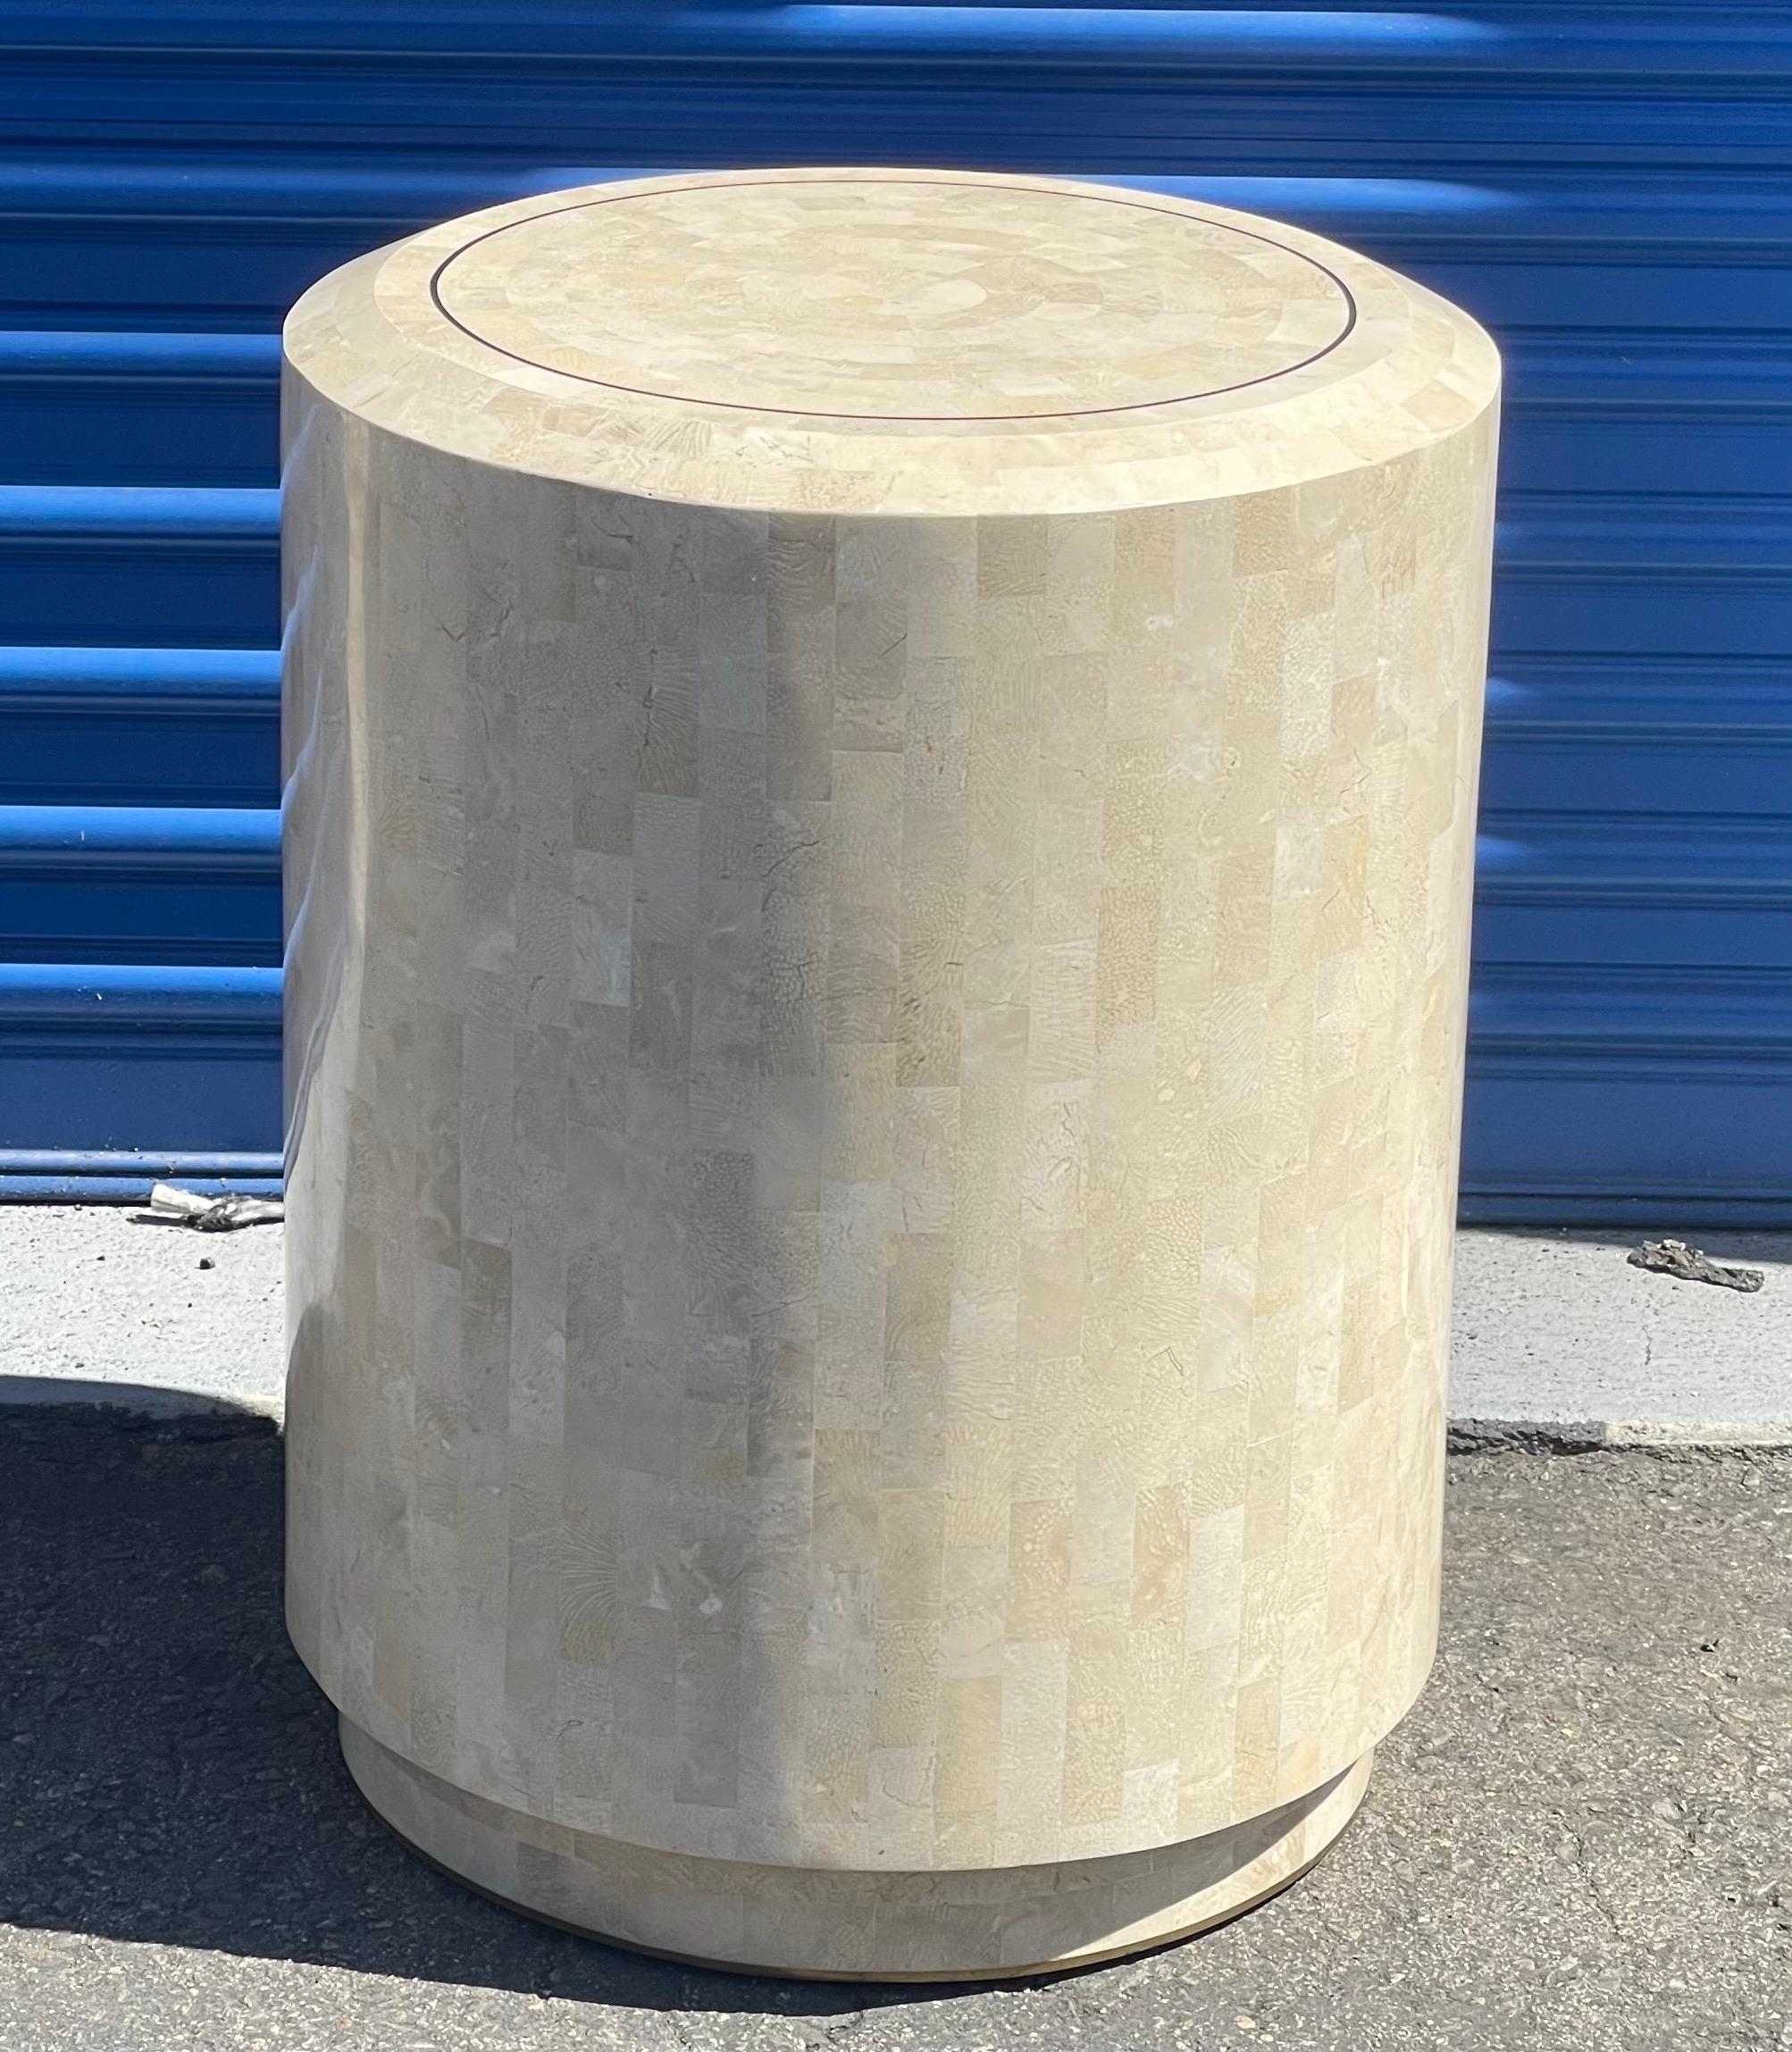 Tessellated stone pedestal / side table with brass accents by Maitland Smith, circa 1970s. Gorgeous piece in great condition that measures 19.5